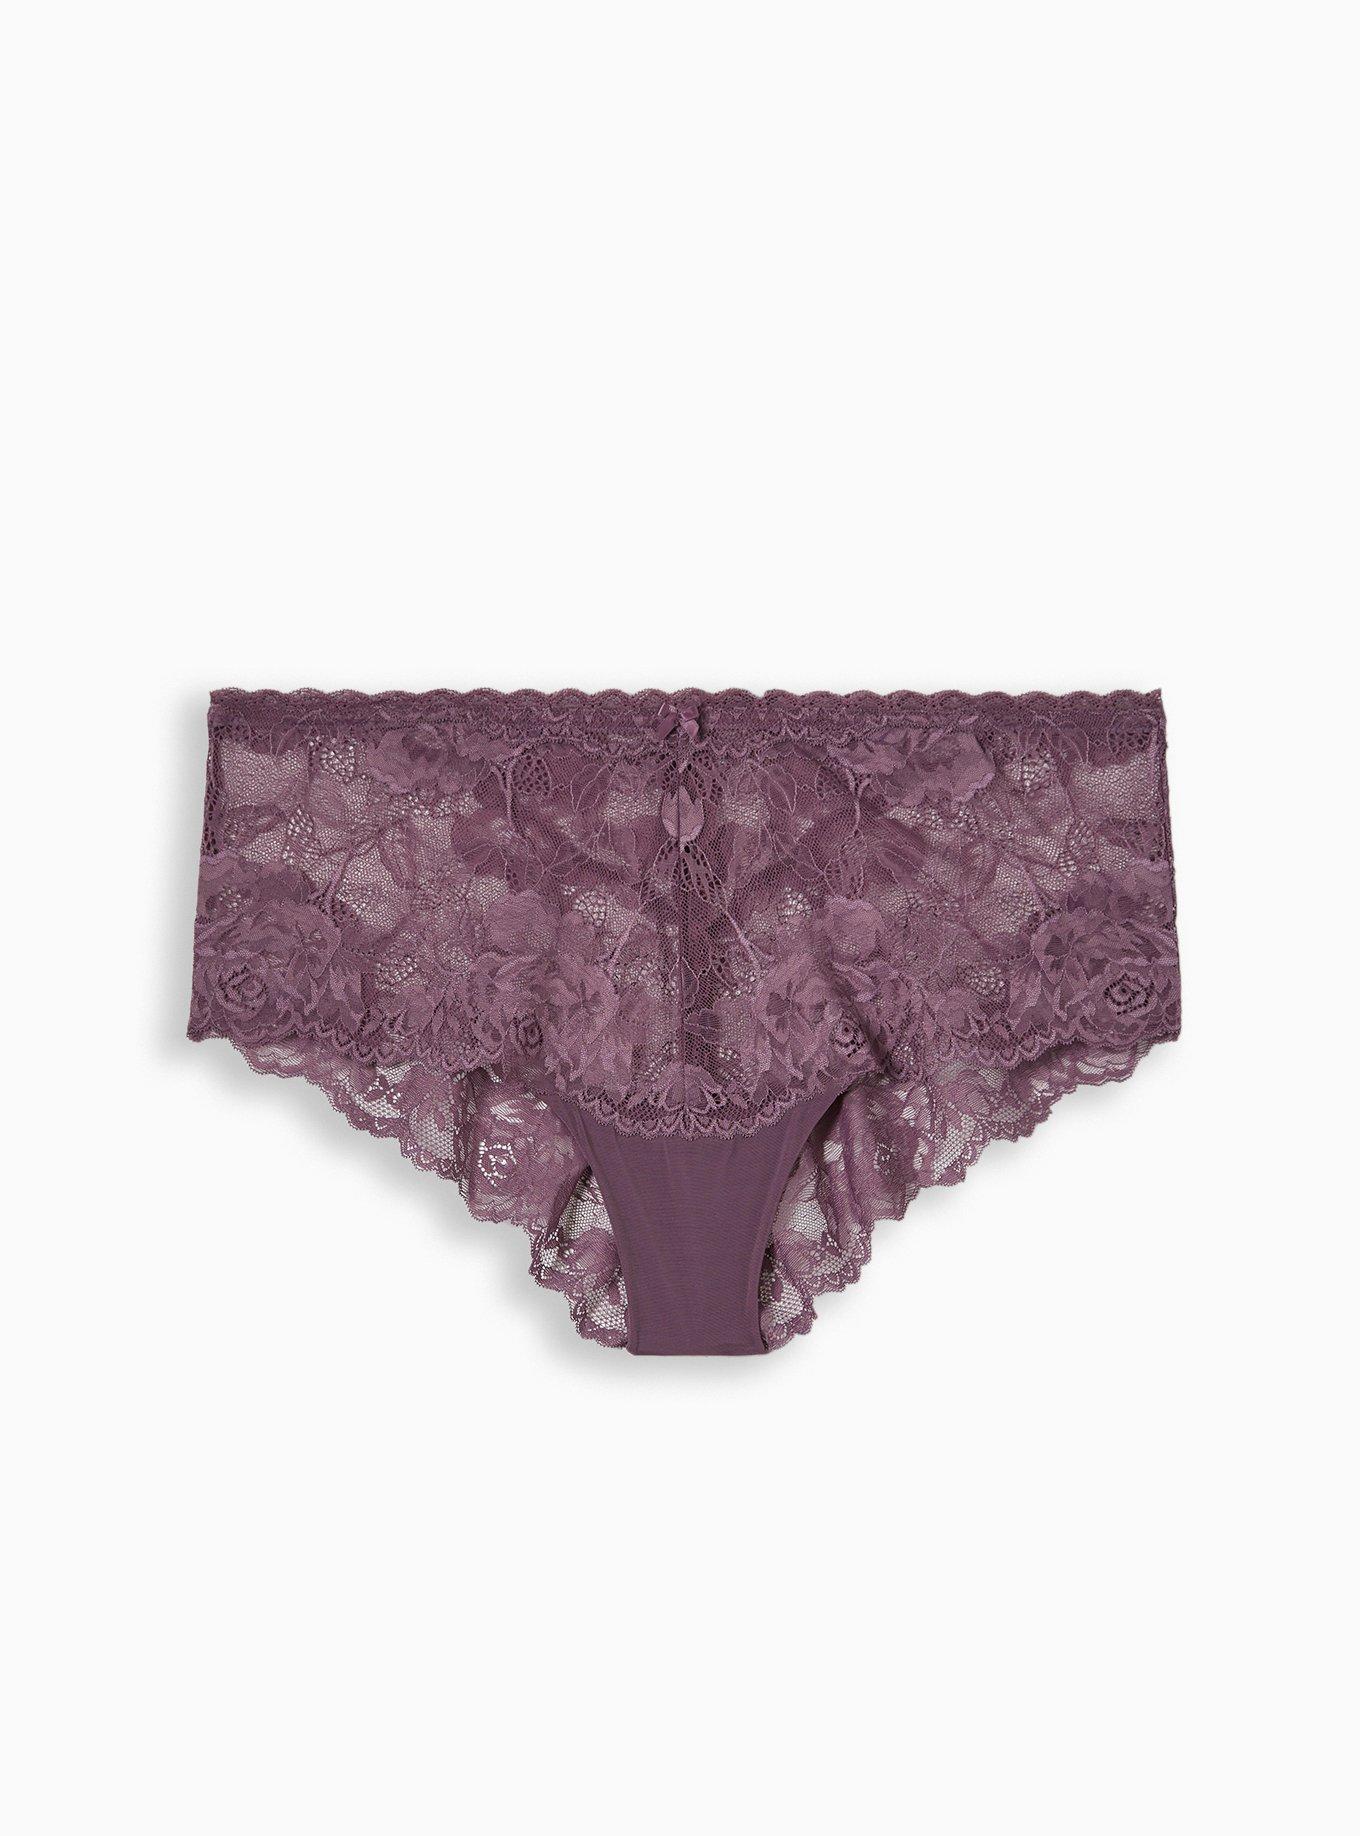 Sexy Panties for Women Lace Back Keyhole Underwear Small-3X Plus